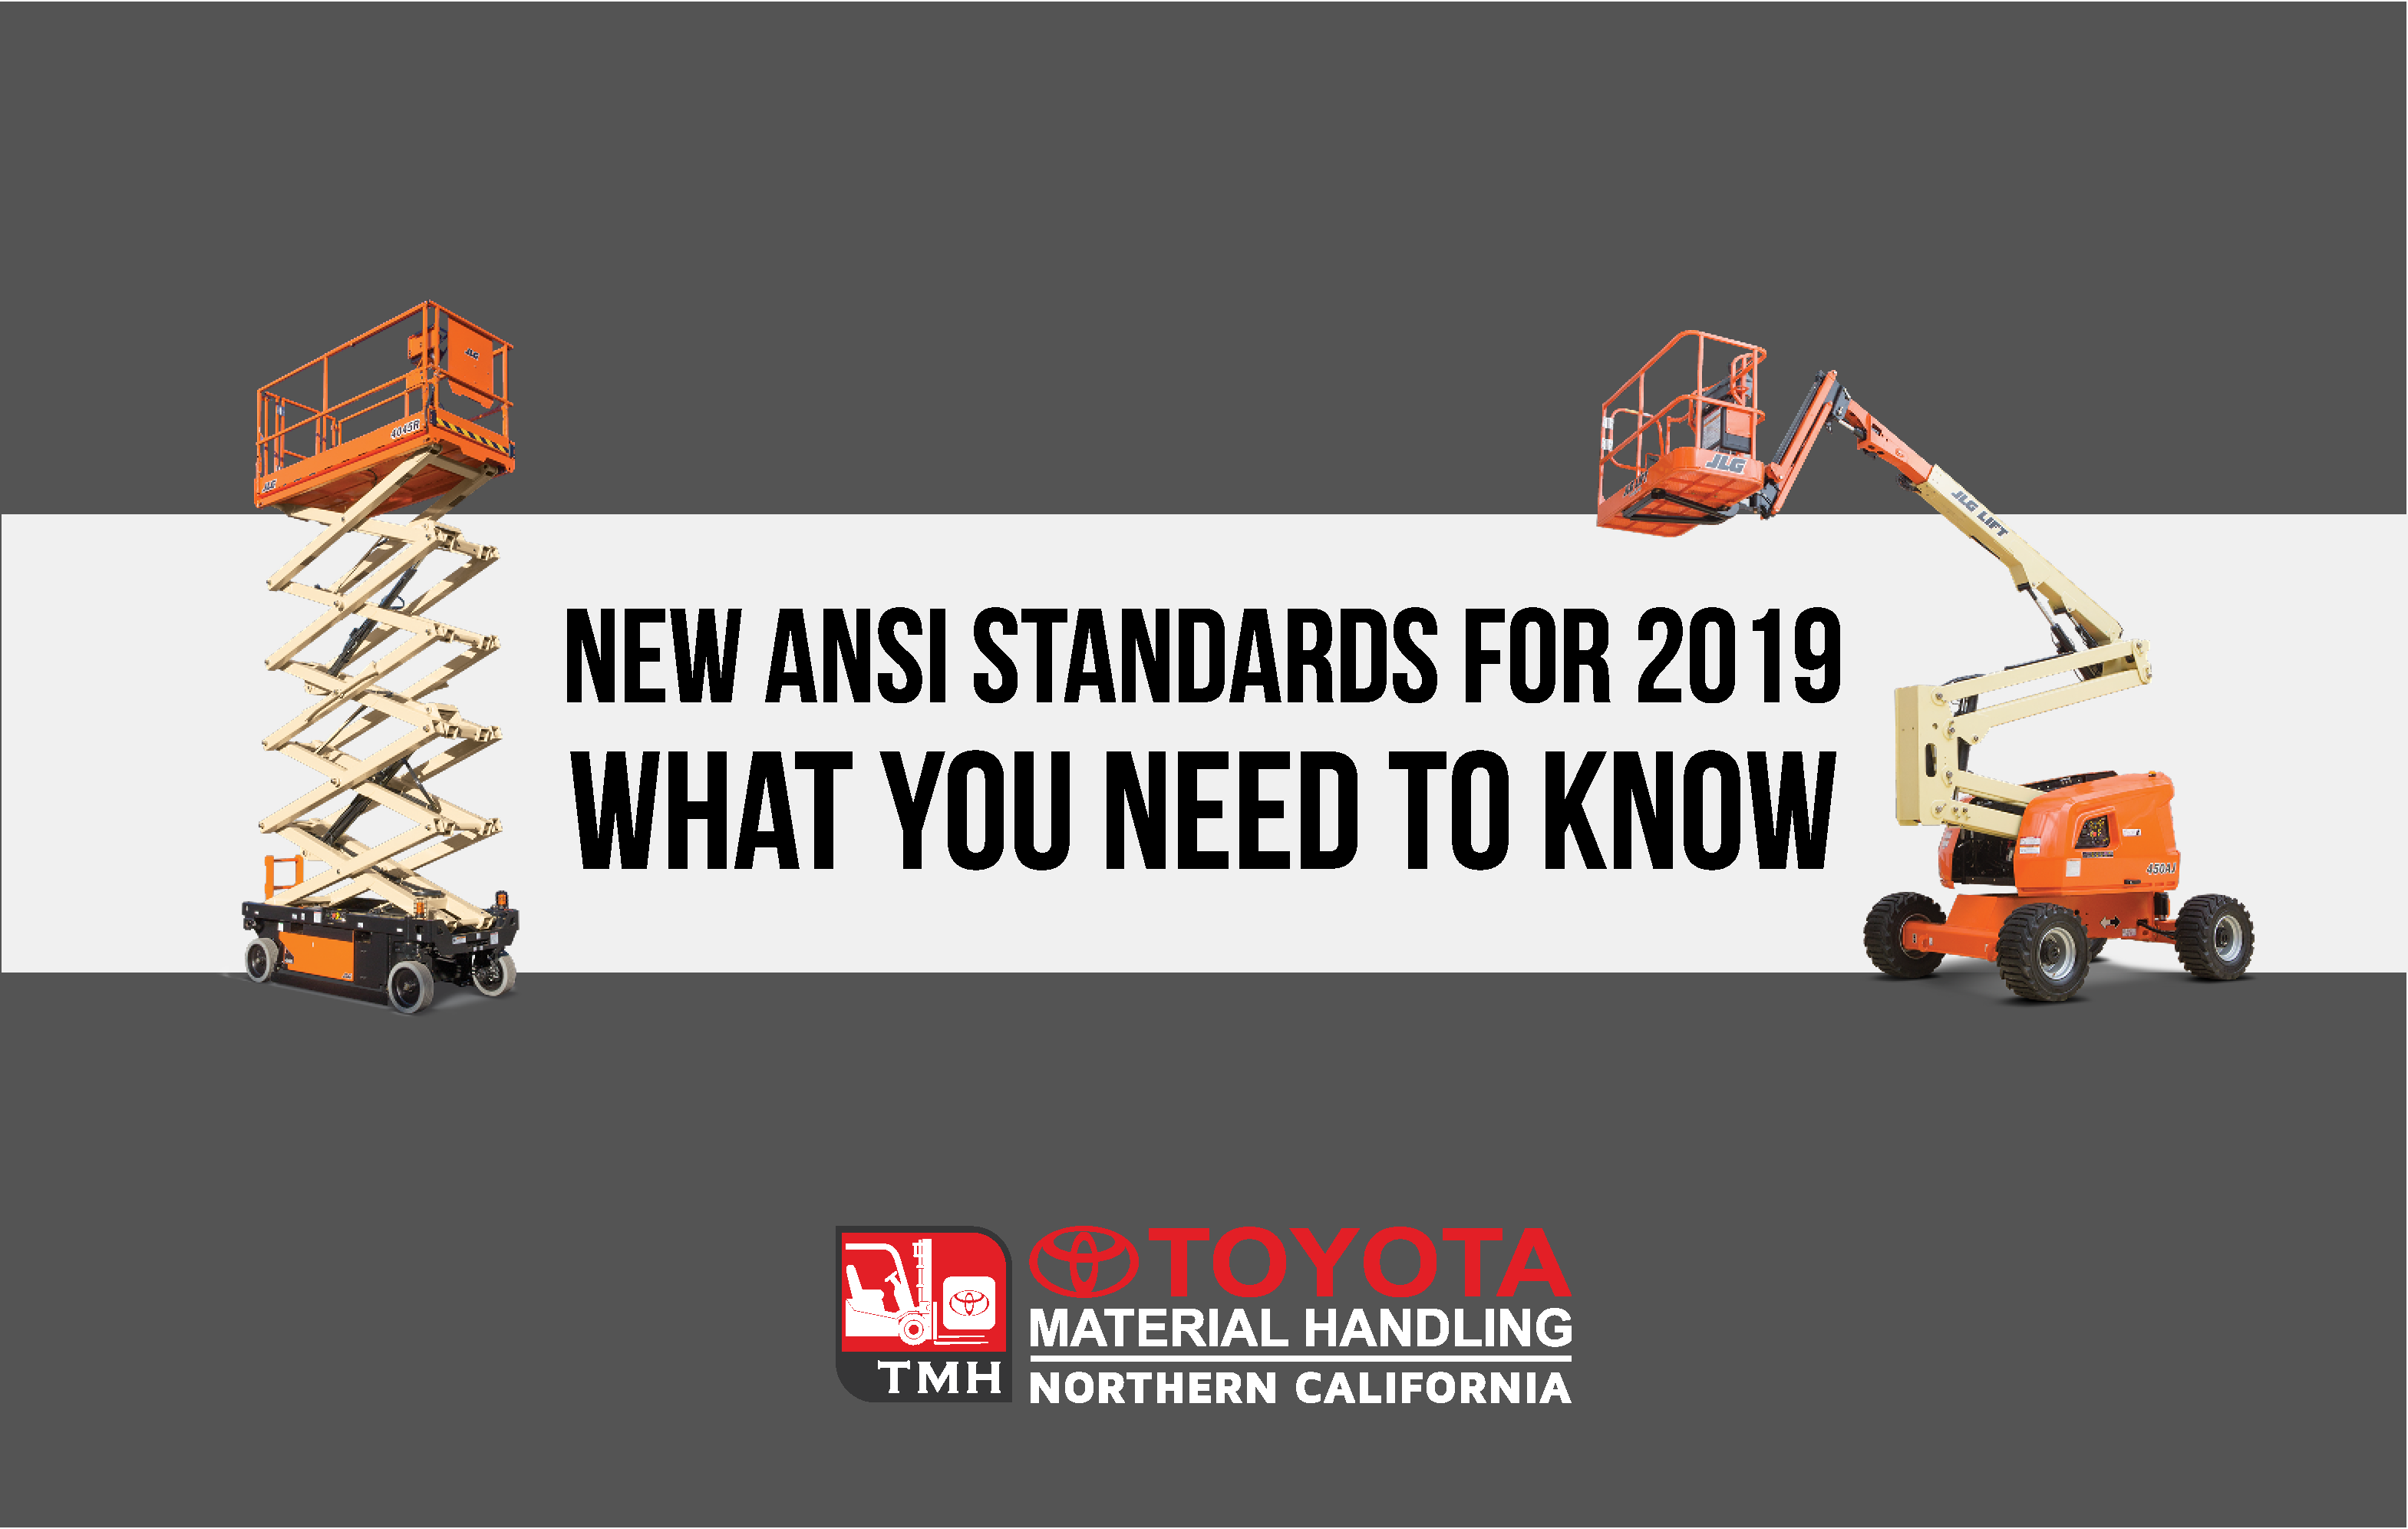 new ansi standards for 2019 MEWPS aerial lifts